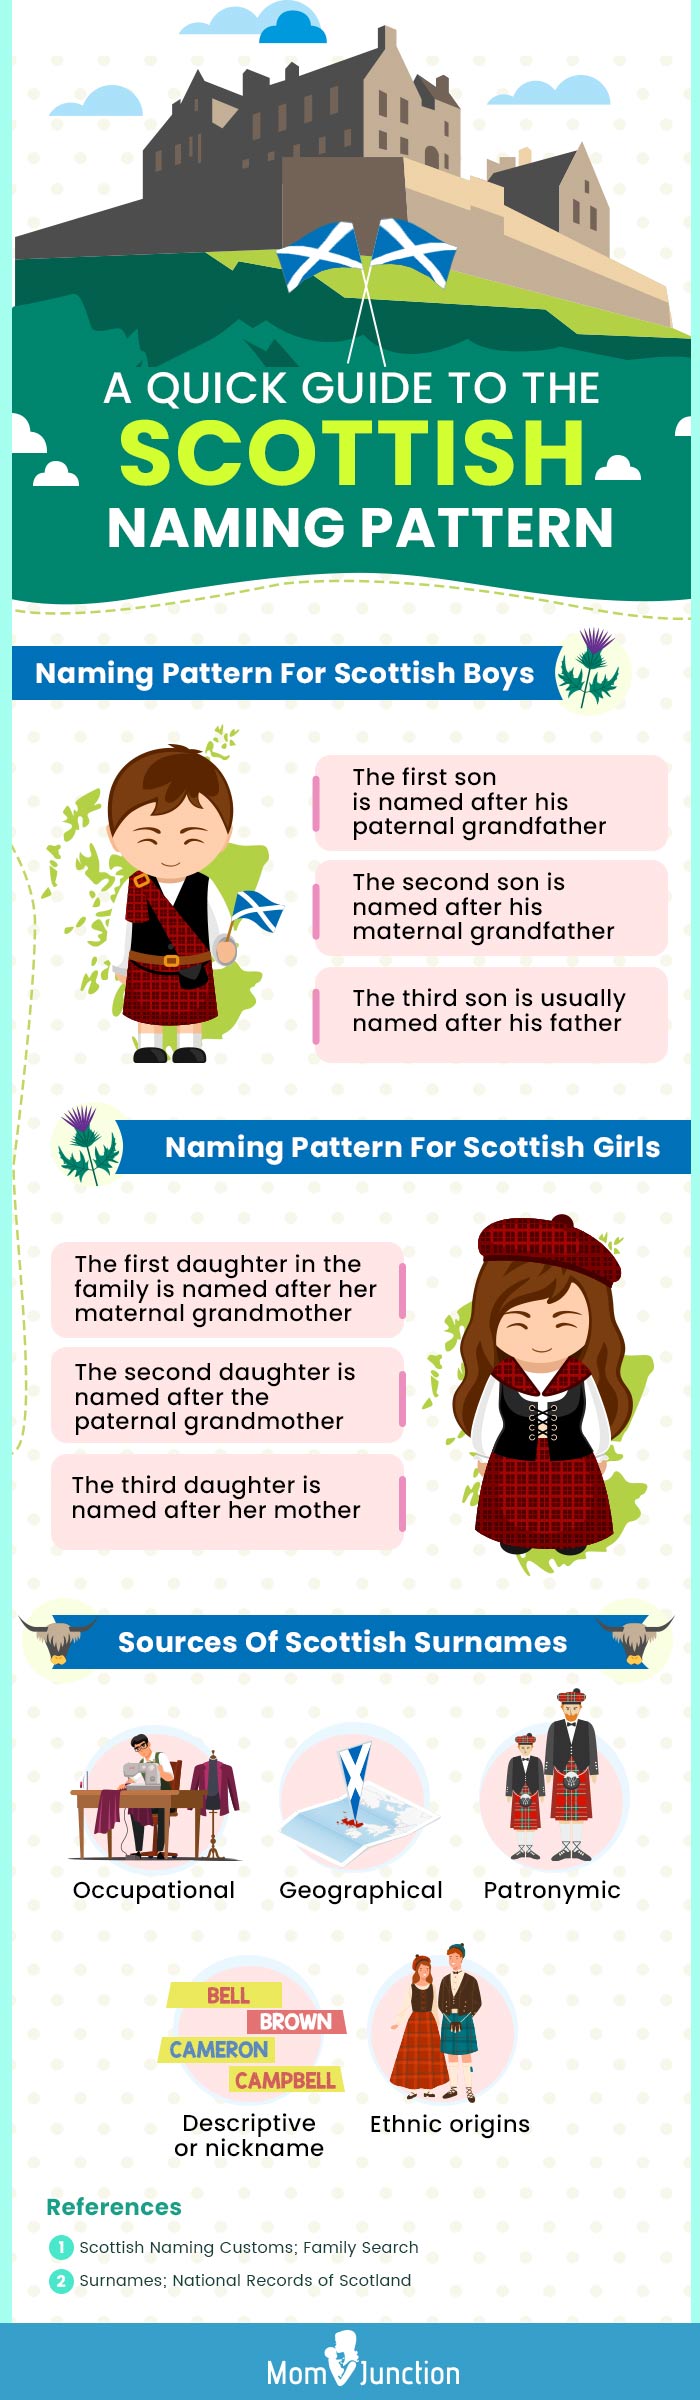 a quick guide to the scottish naming pattern [infographic]